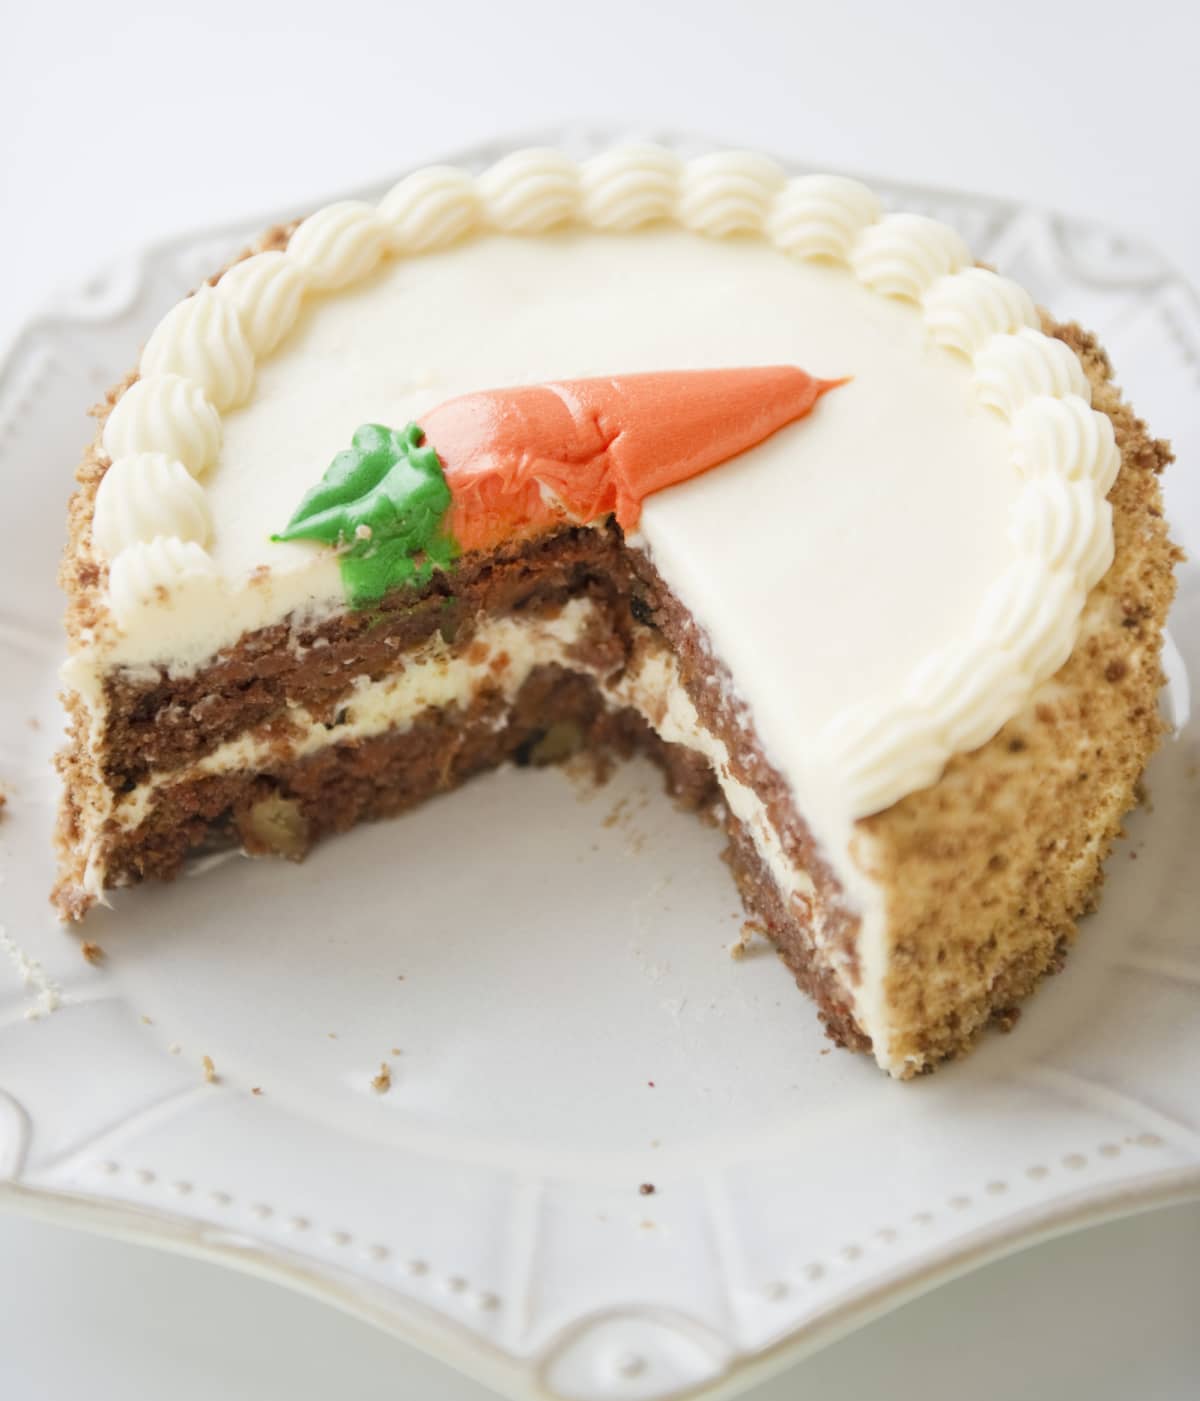 Carrot cake with some slices taken out on a white surface